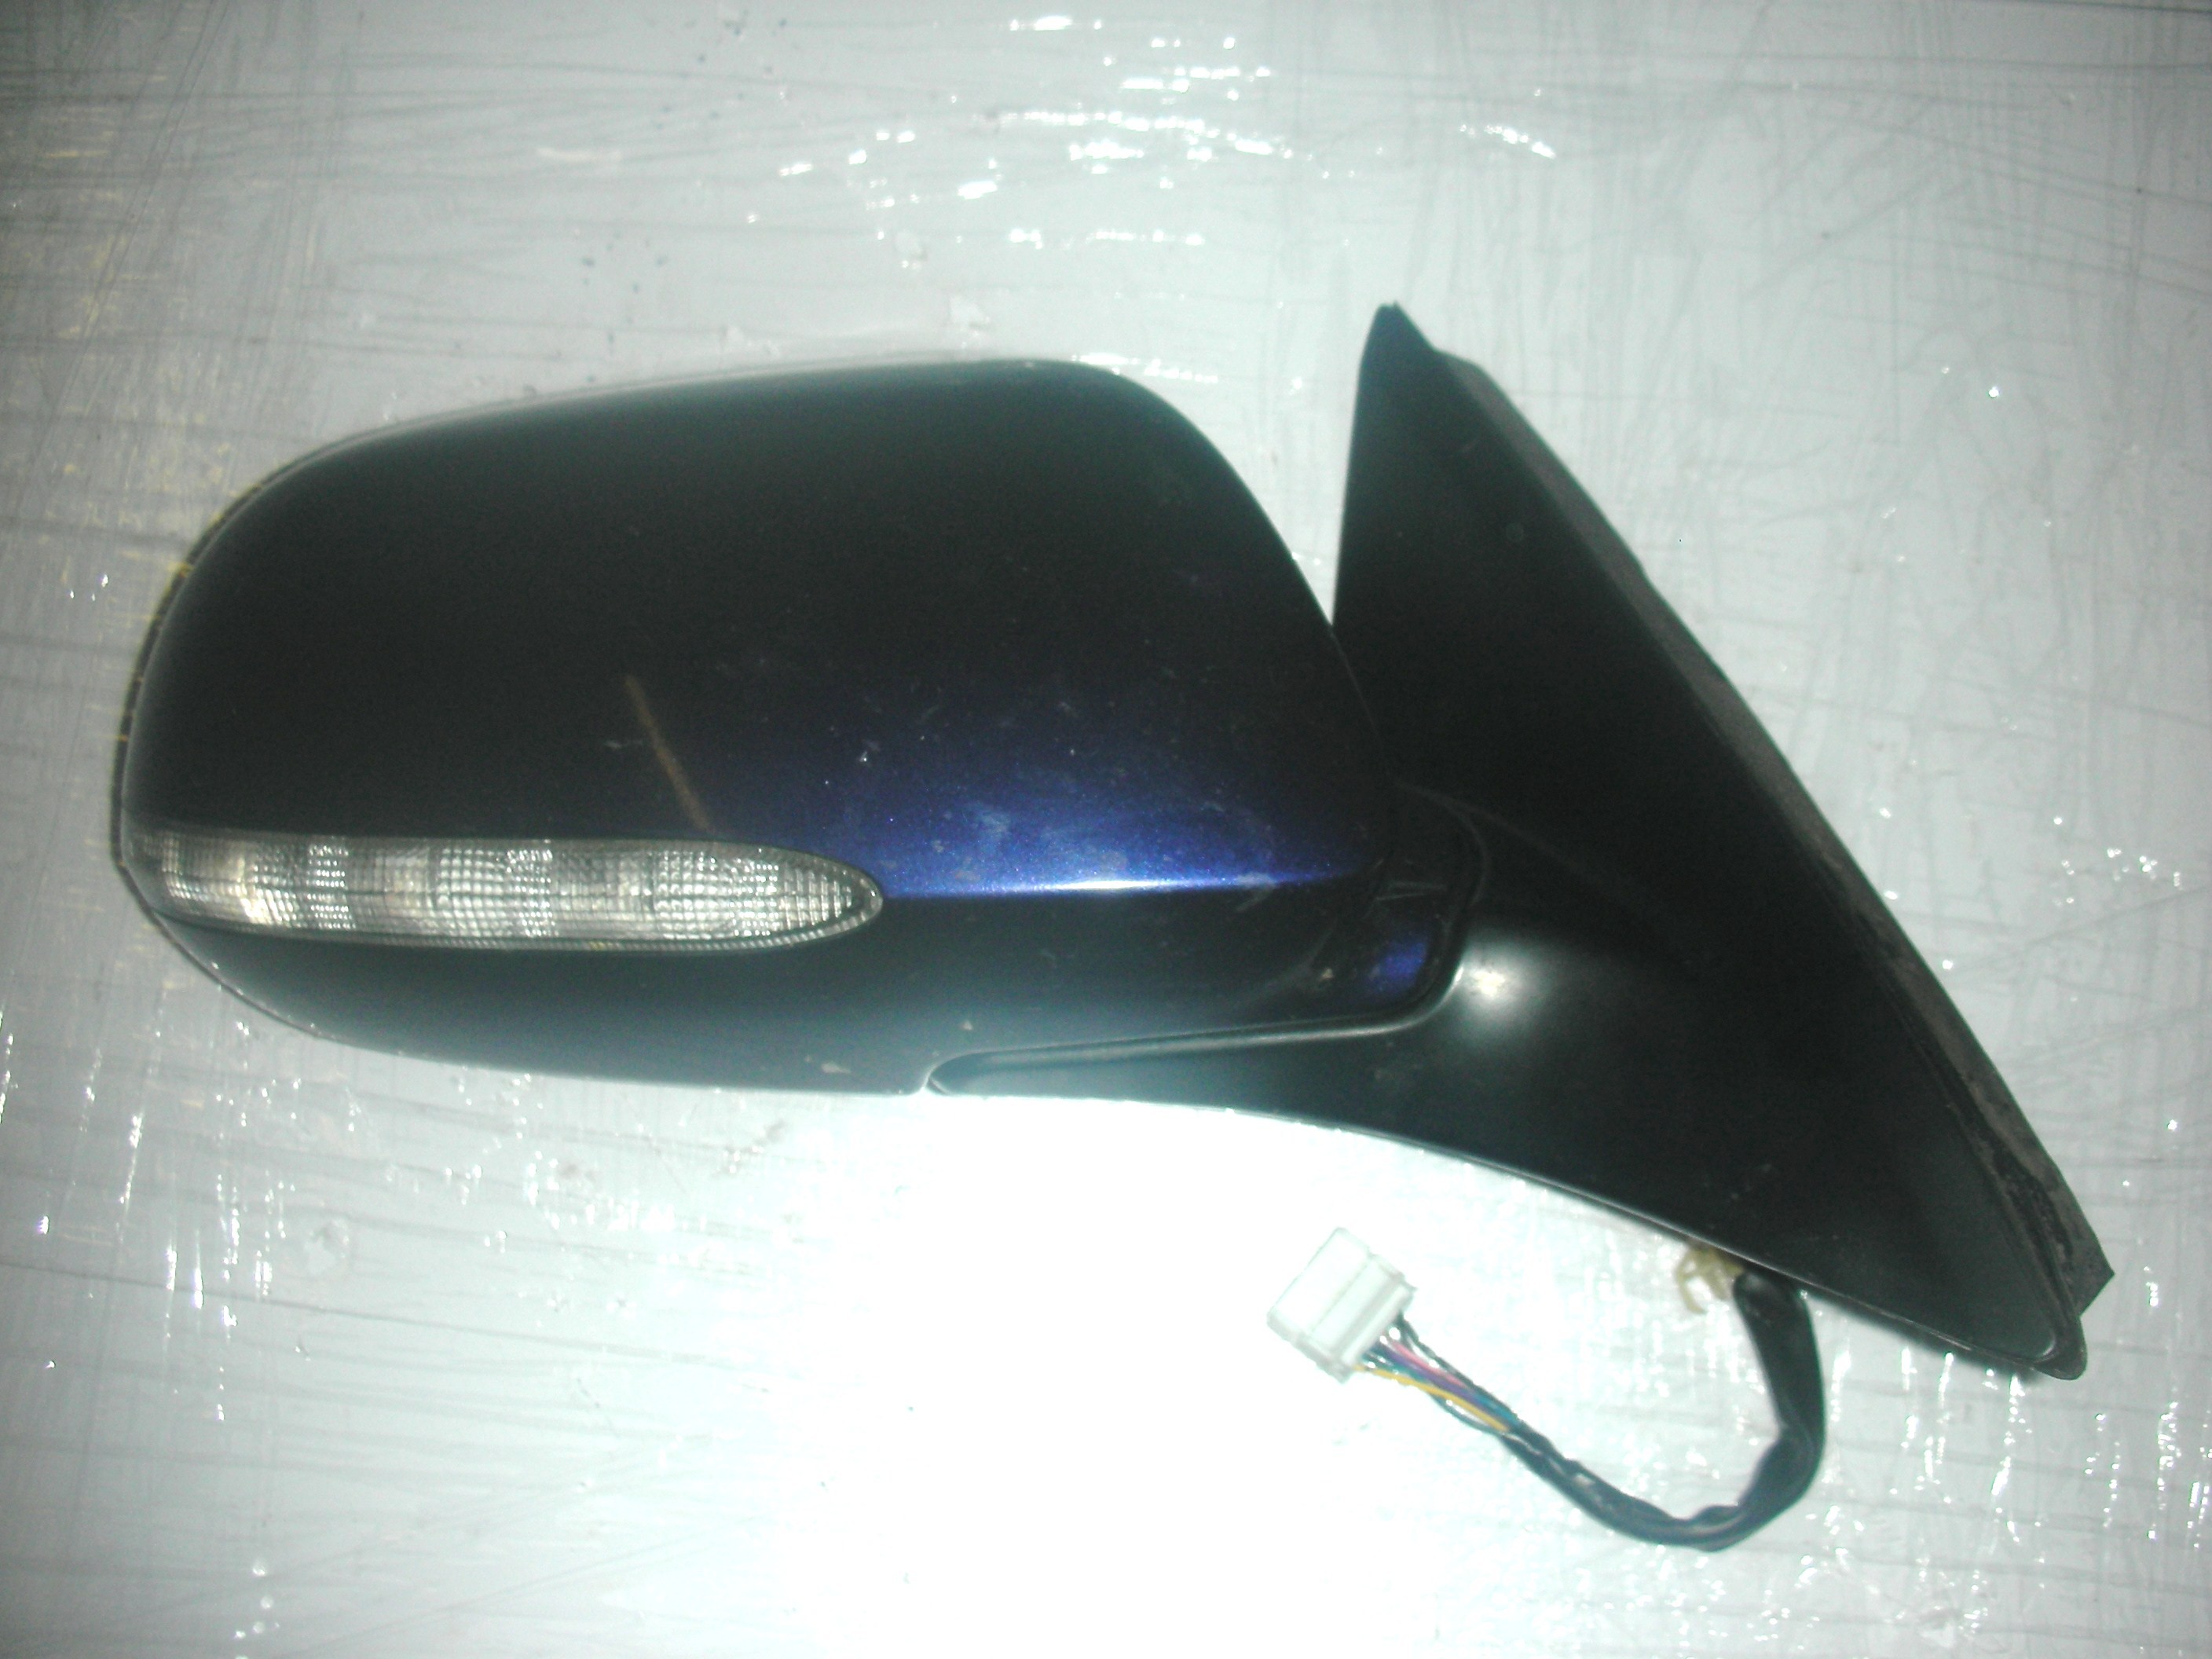 HONDA ACCORD 2200 CC DRIVER SIDE FRONT MIRROR INDICATOR TYPE 2003-2007.